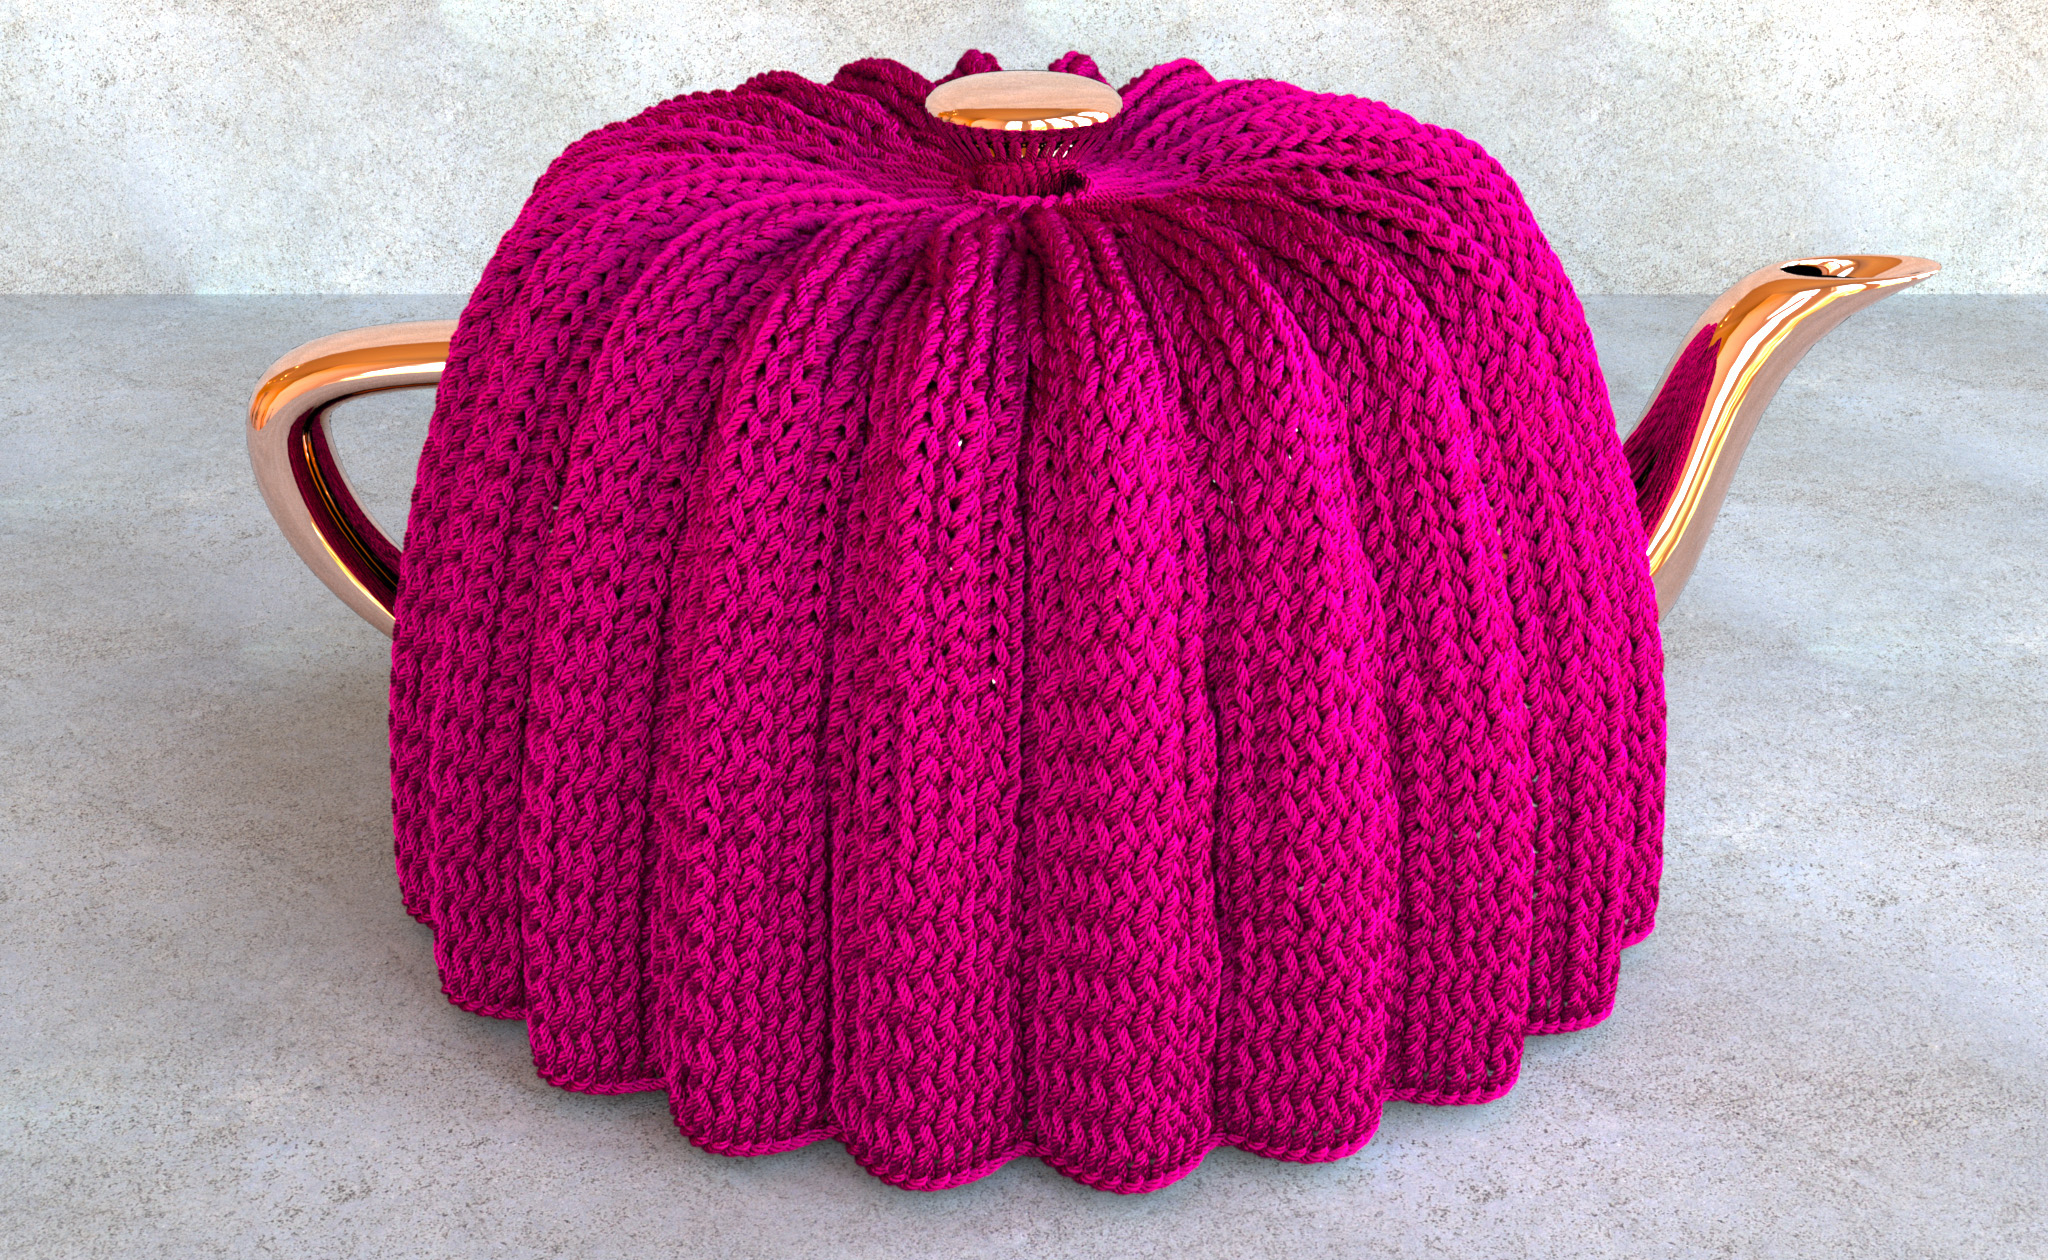 Tea Cosy Knitting Patterns Easy Knitted Tea Cosy Patterns Browse Patterns